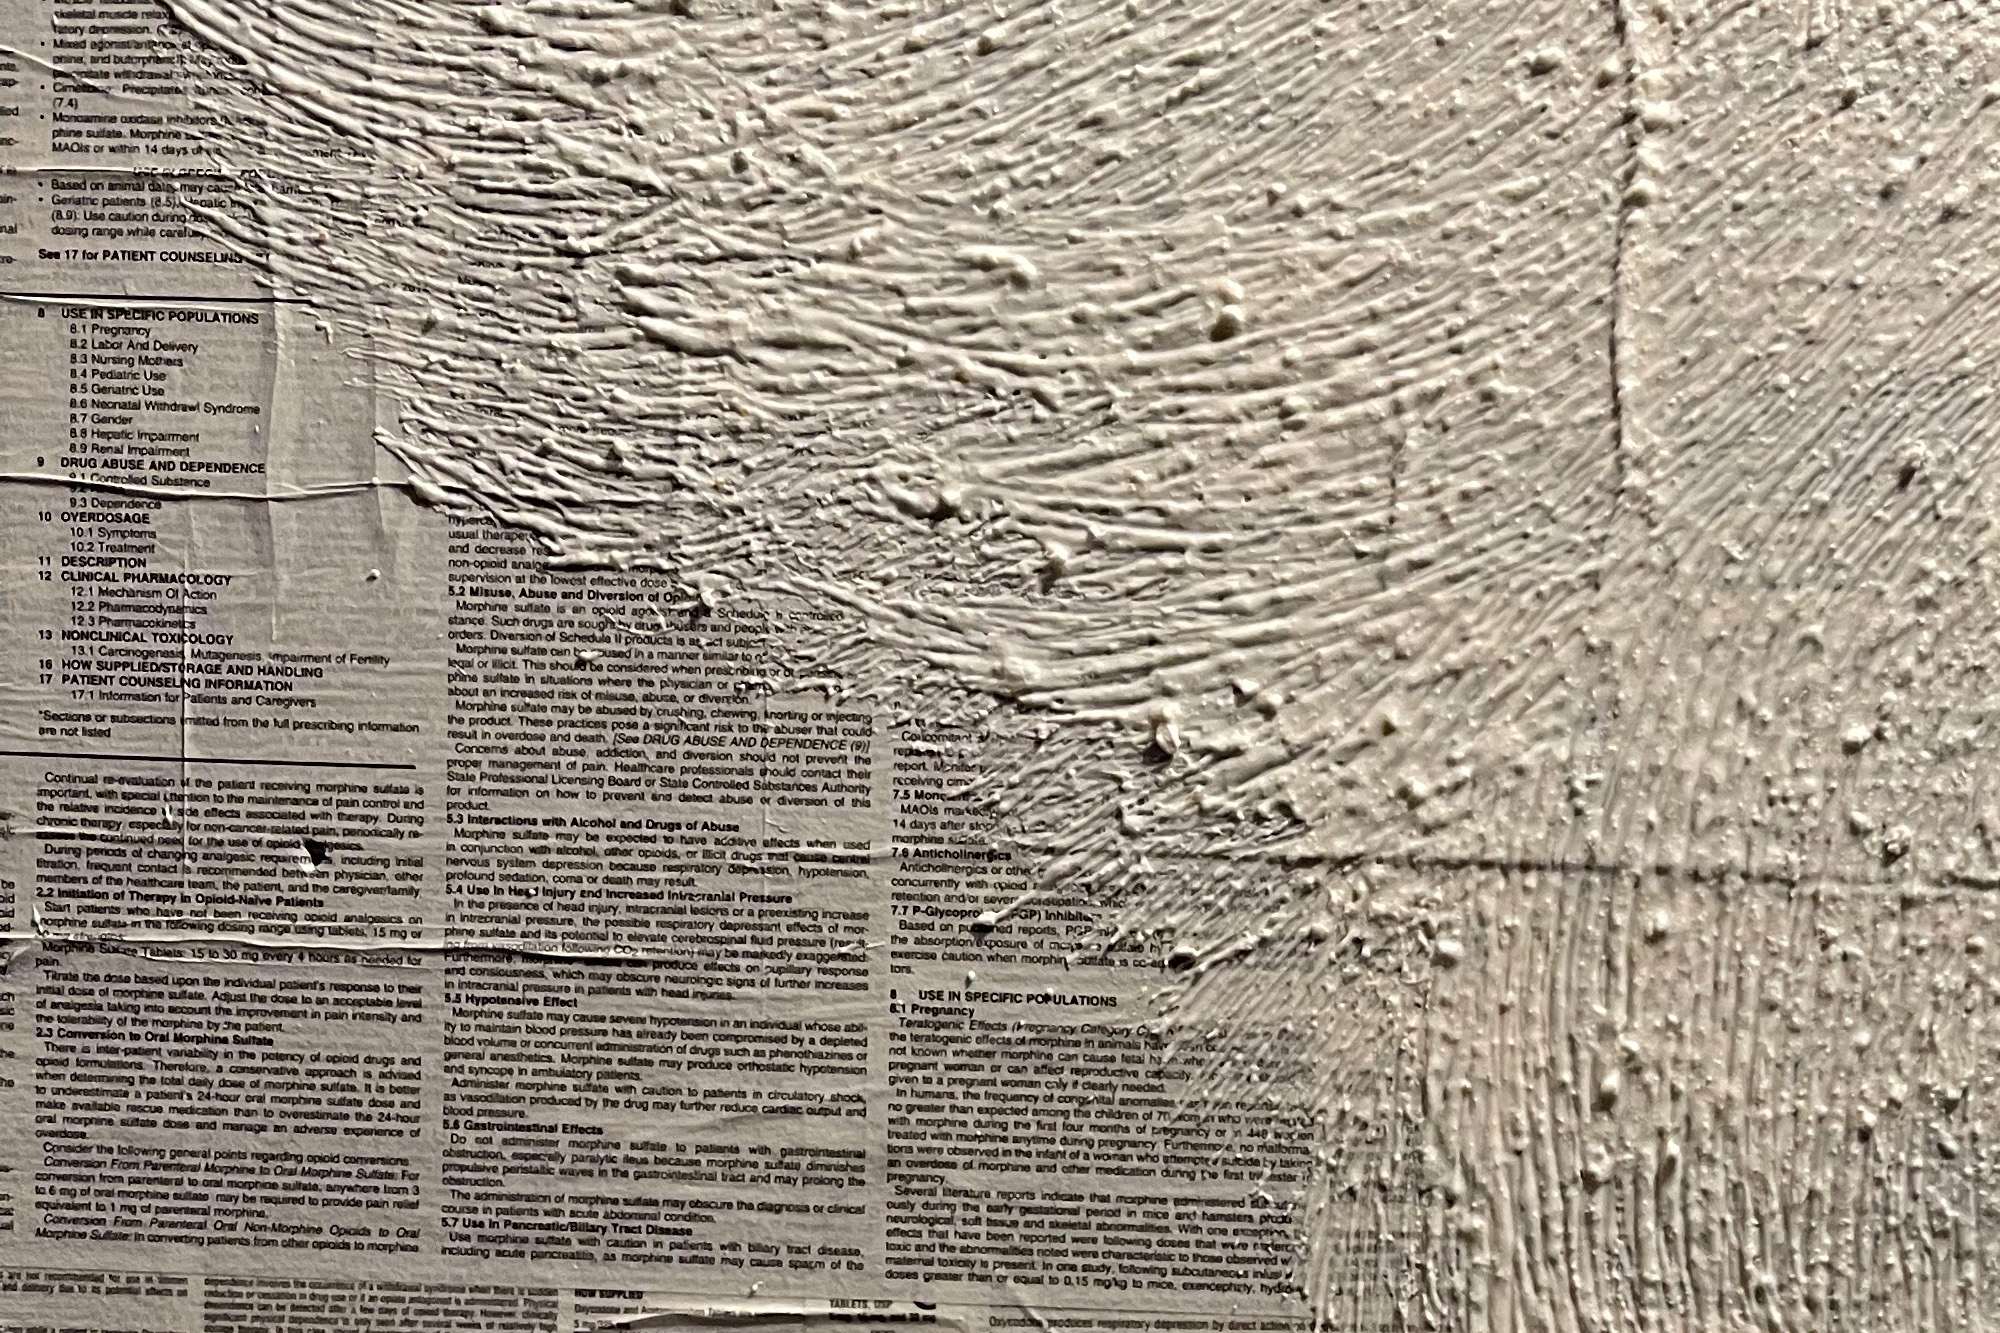 A close up of part of a mixed media painting created by Heather Lawver titled "Icarus Oath", created using crushed up Tylenol mixed in gesso, atop a canvas covered in collaged narcotic drug information insert papers.